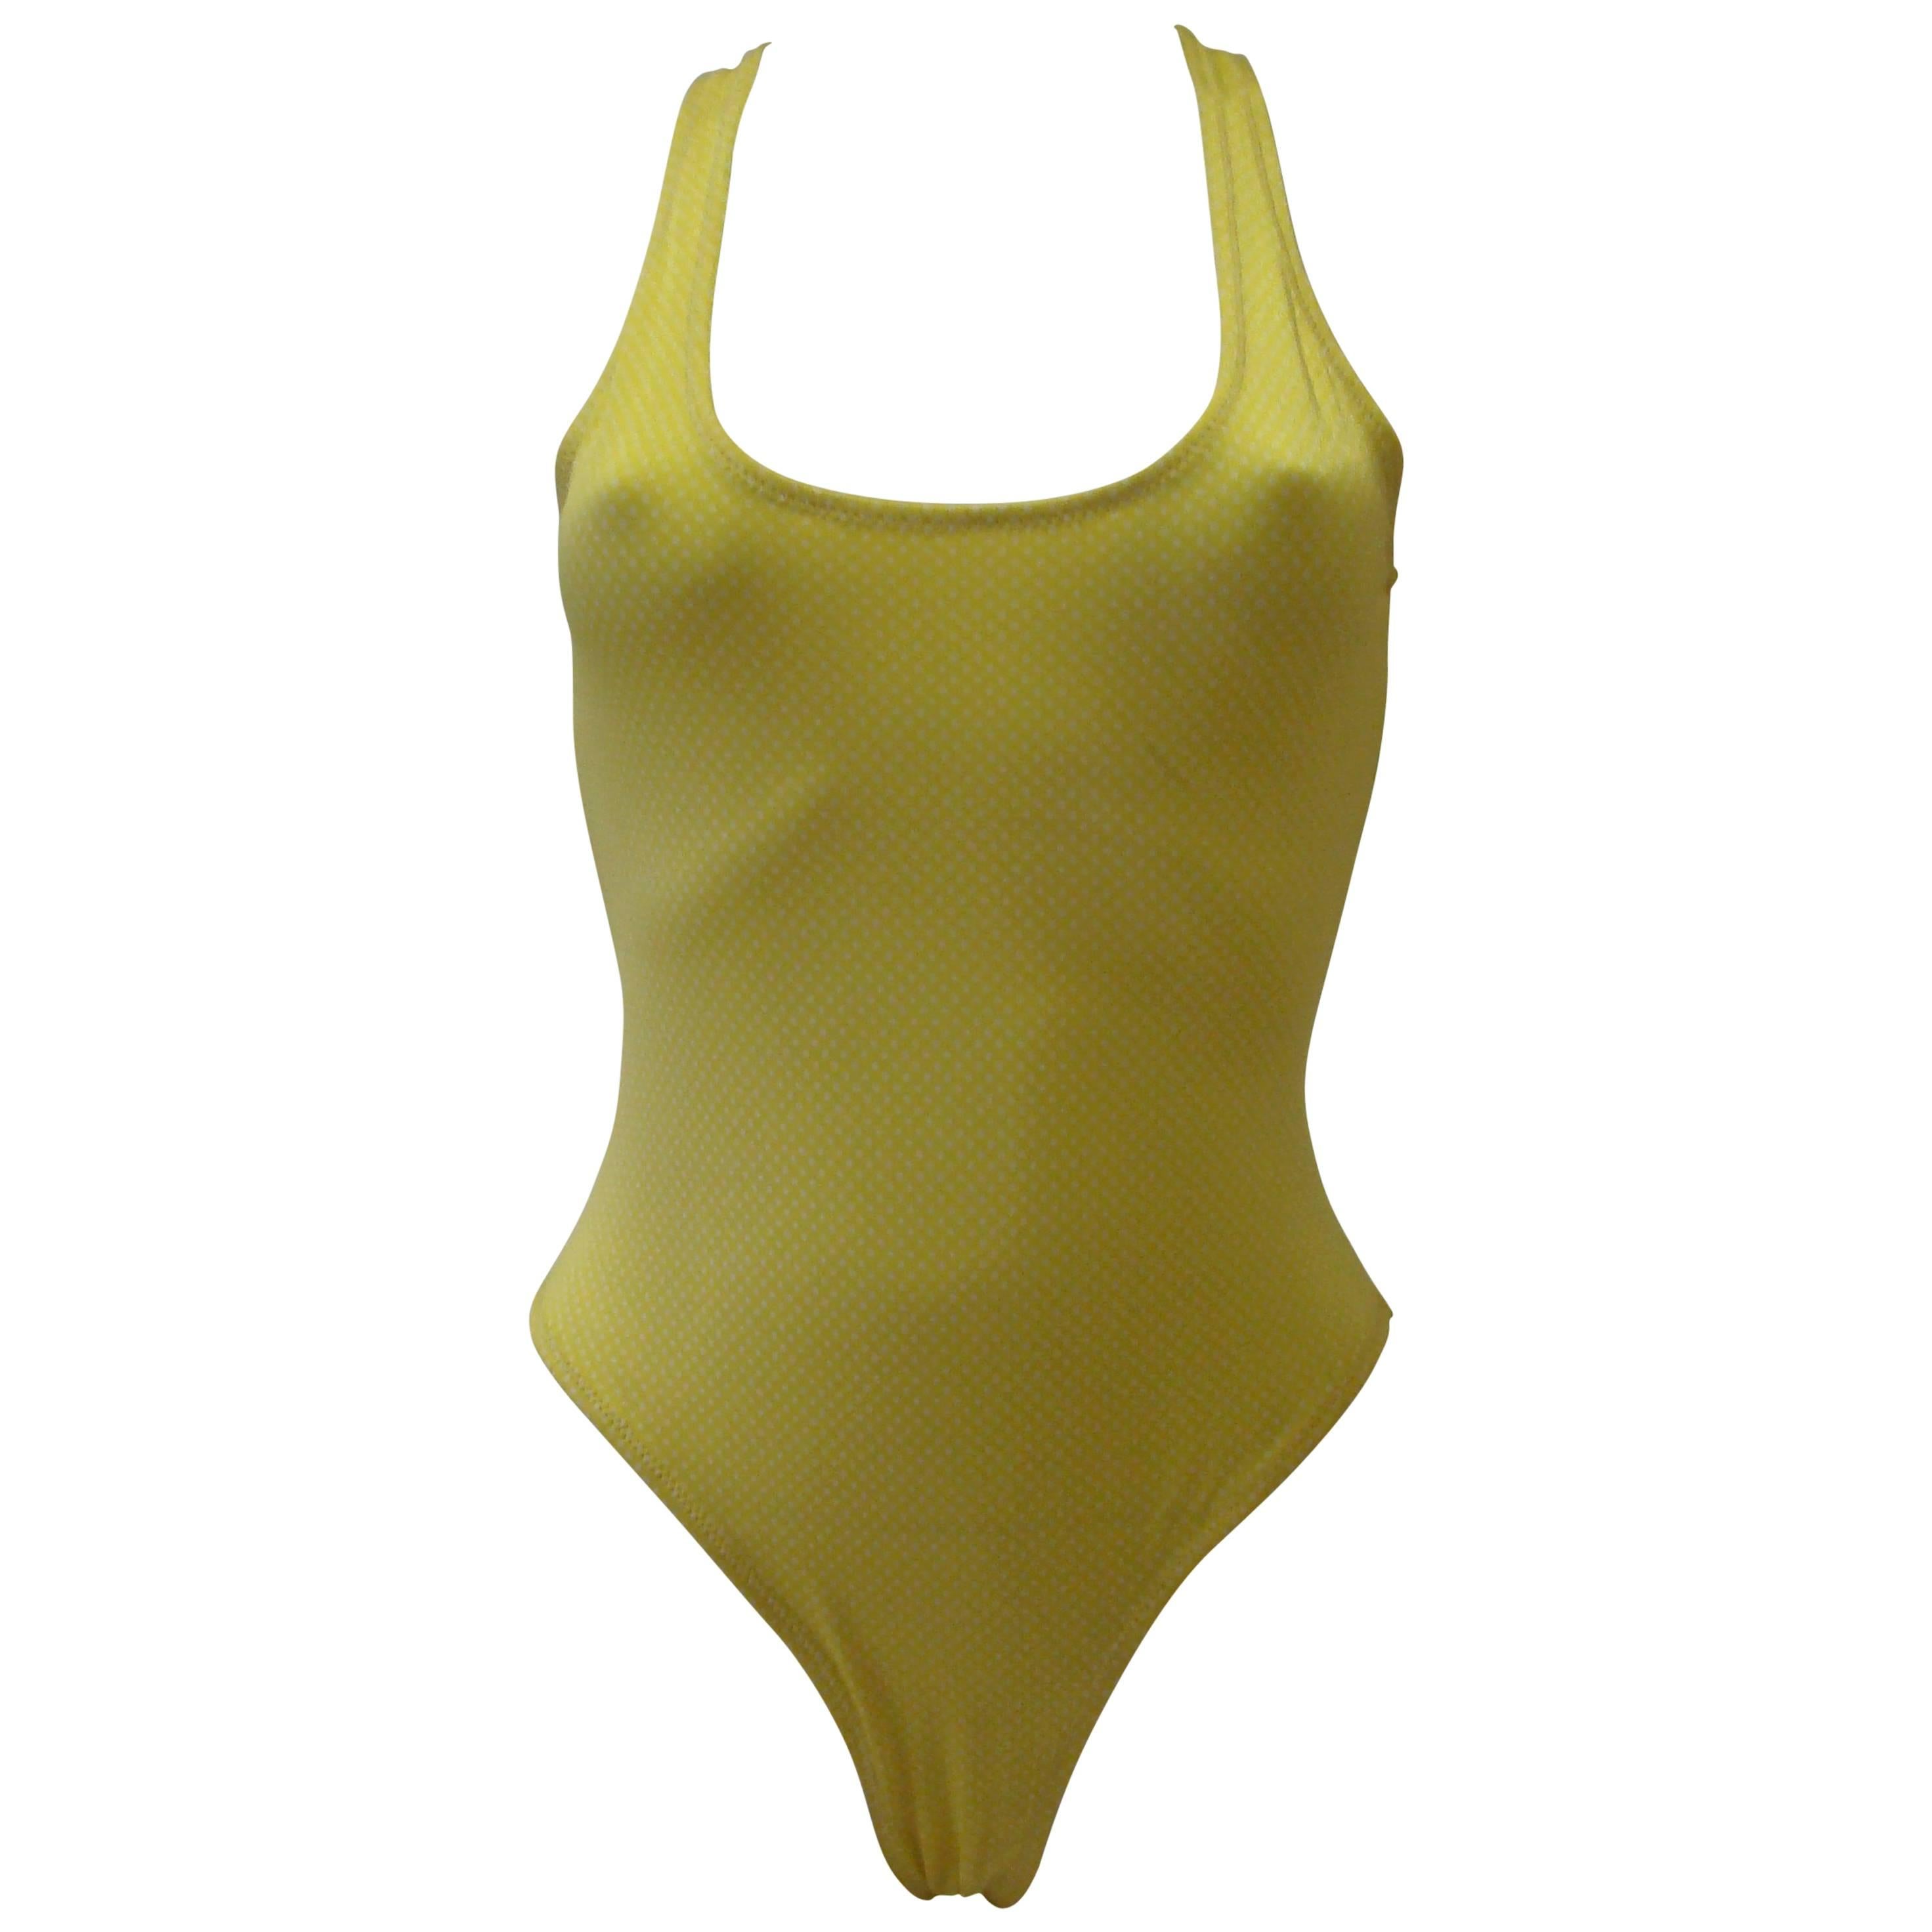 Gianni Versace Mare Lemon Bathing Suit With White Polka Dots For Sale